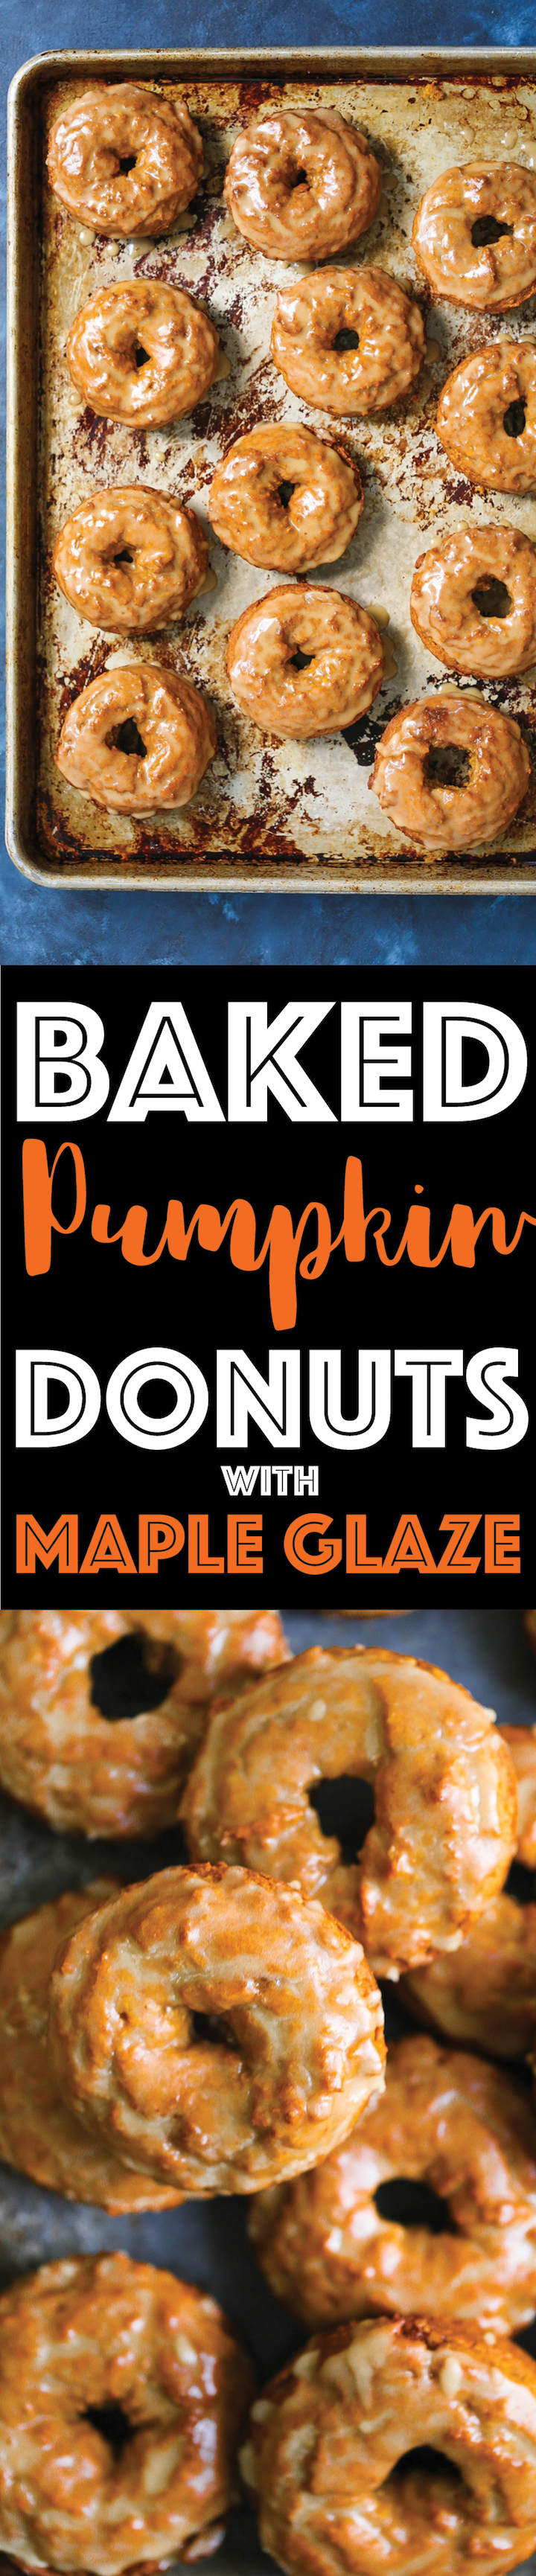 Baked Pumpkin Donuts with Maple Glaze - These are the best Fall pumpkin donuts ever. So soft, so crumbly and so perfectly smothered in a warm maple glaze!